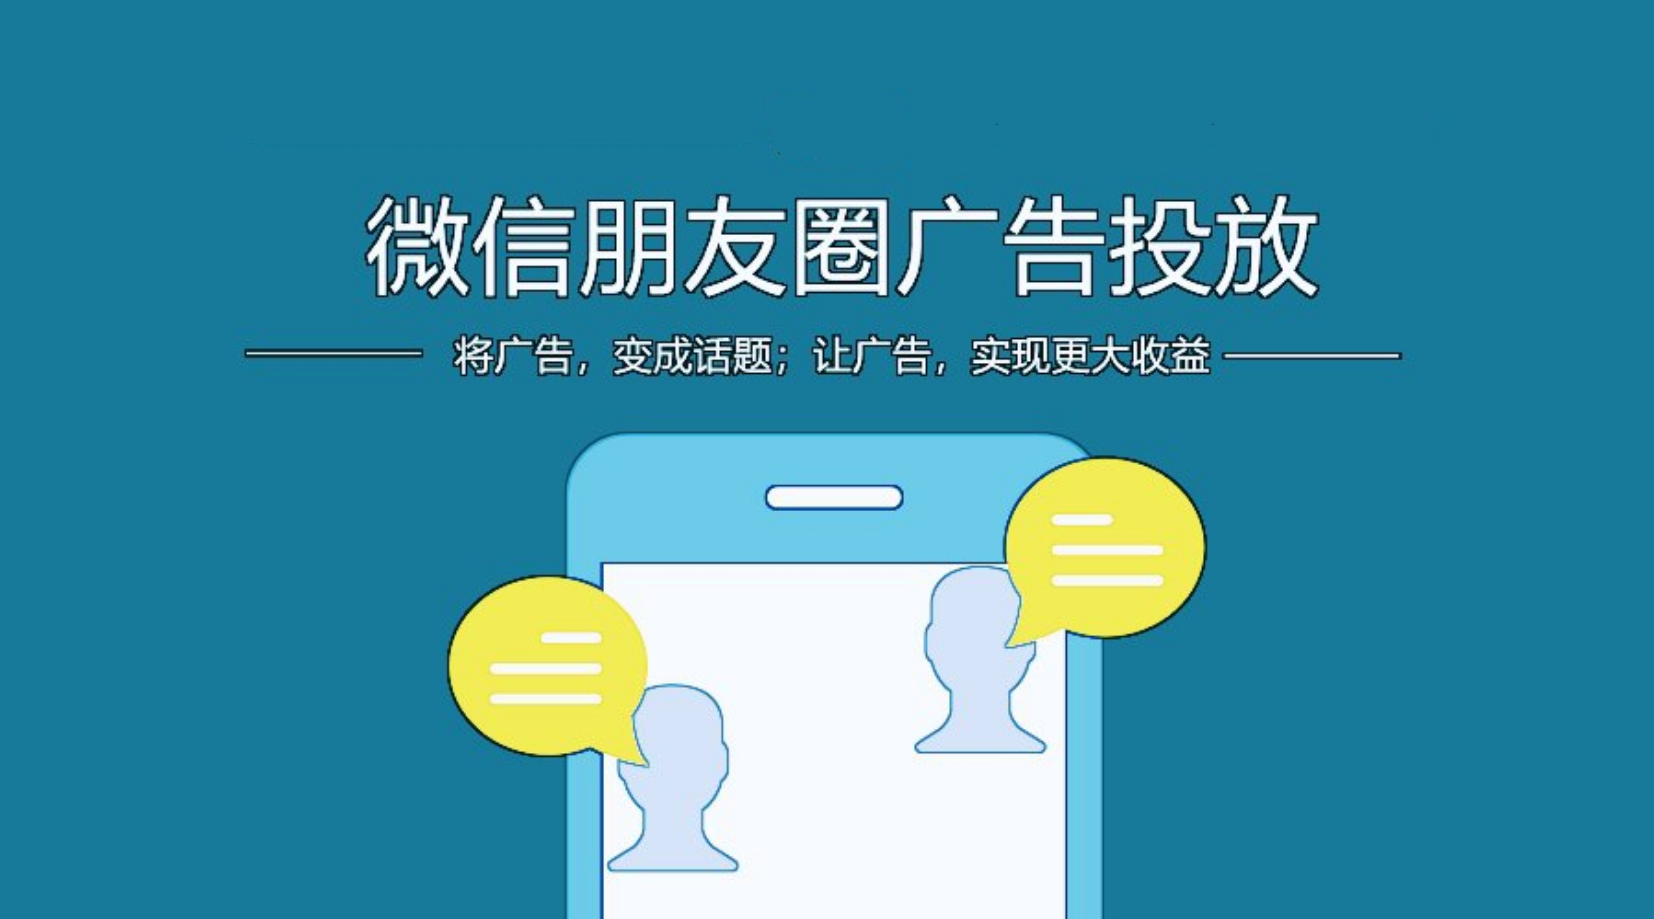 The most annoying thing about WeChat is the inclusion of advertisements in its Moments